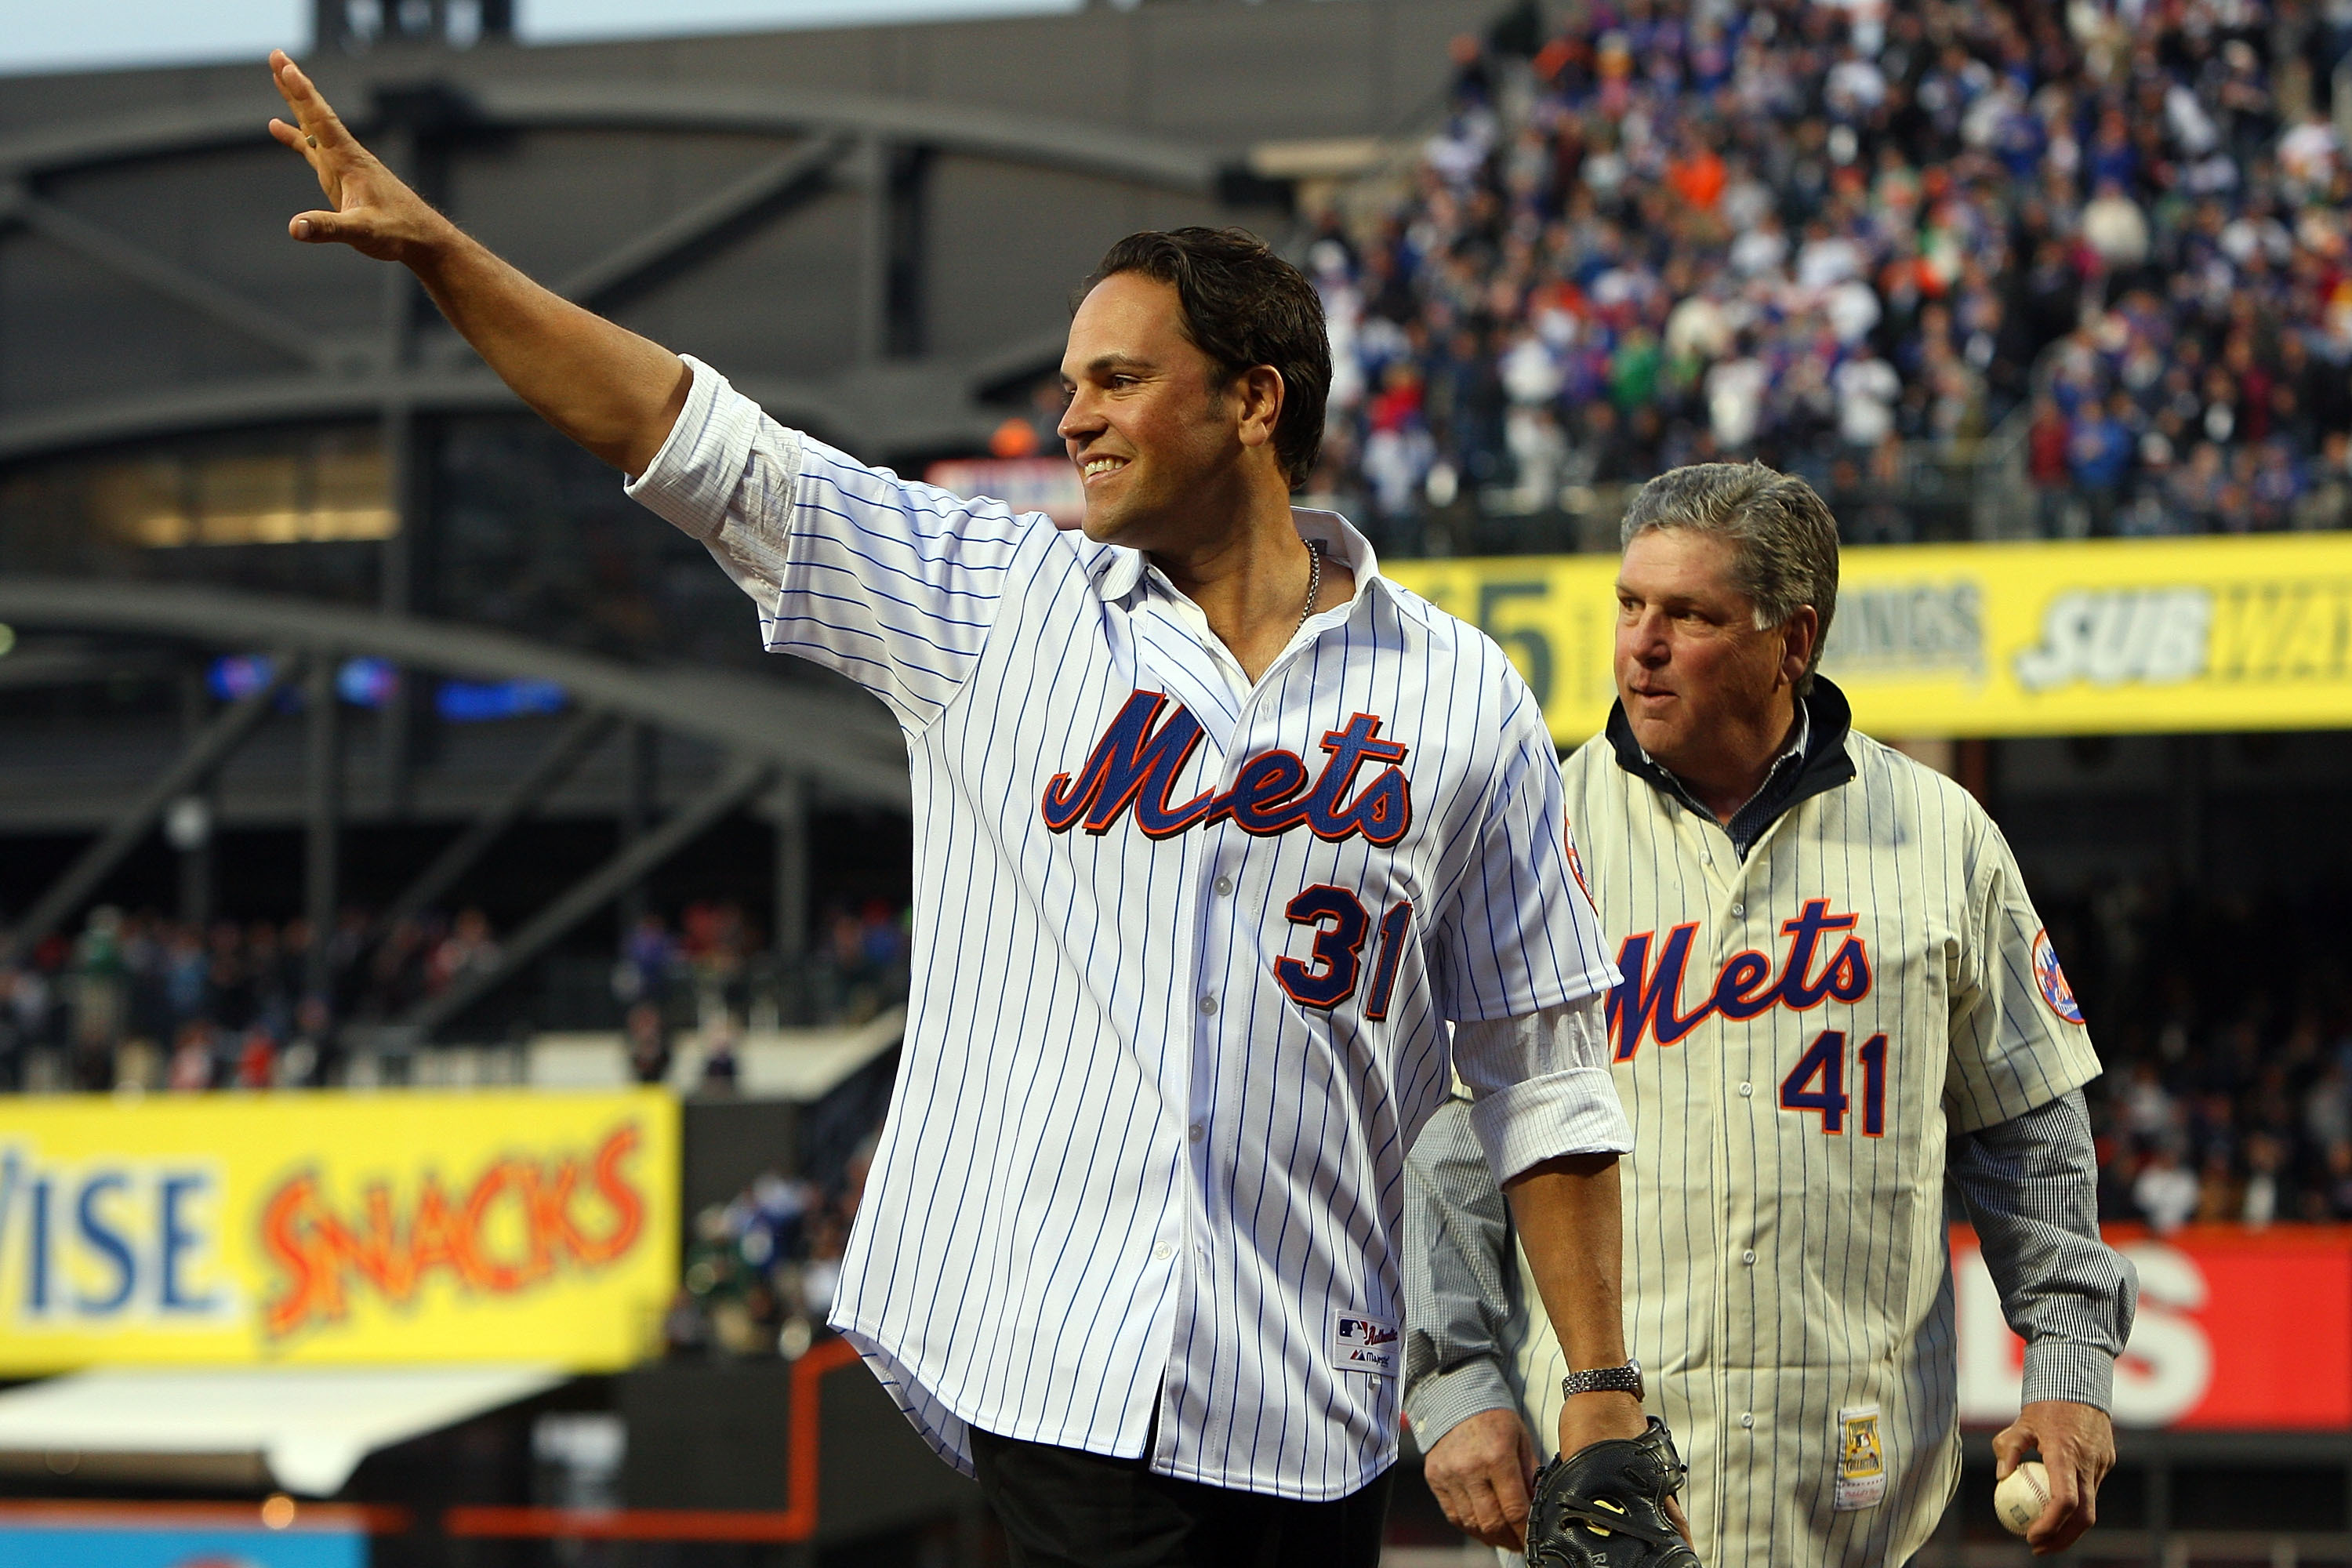 SNY - During his time as a Met, Mike Piazza established